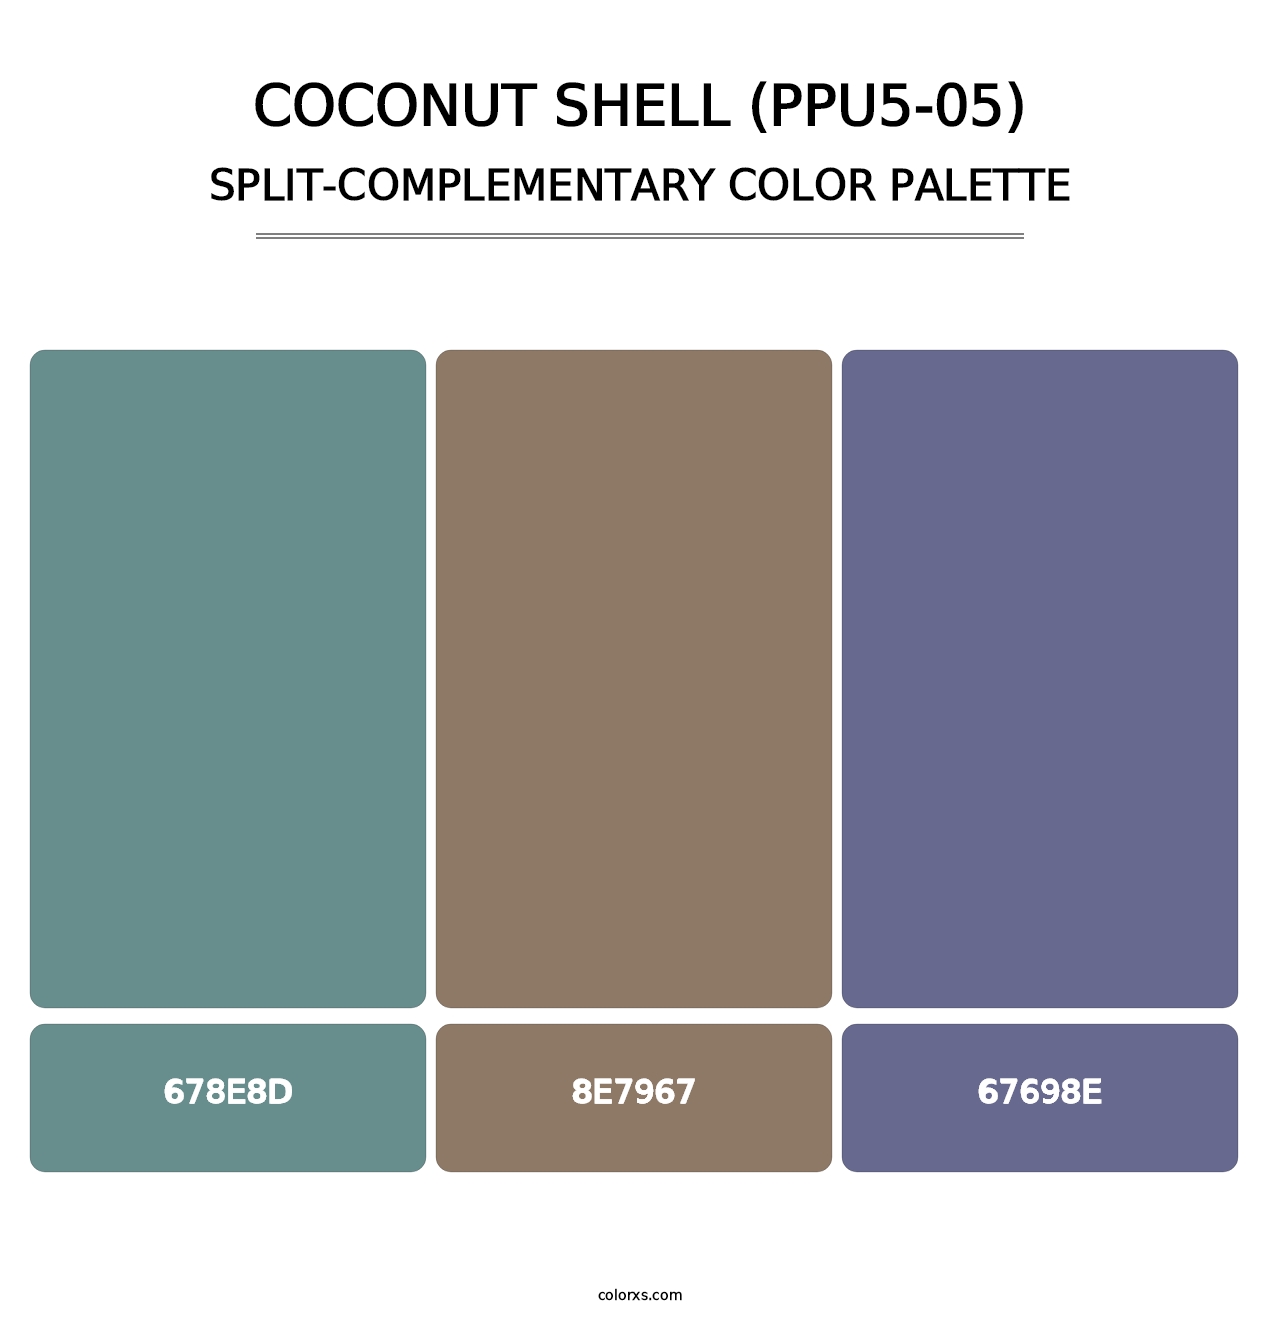 Coconut Shell (PPU5-05) - Split-Complementary Color Palette